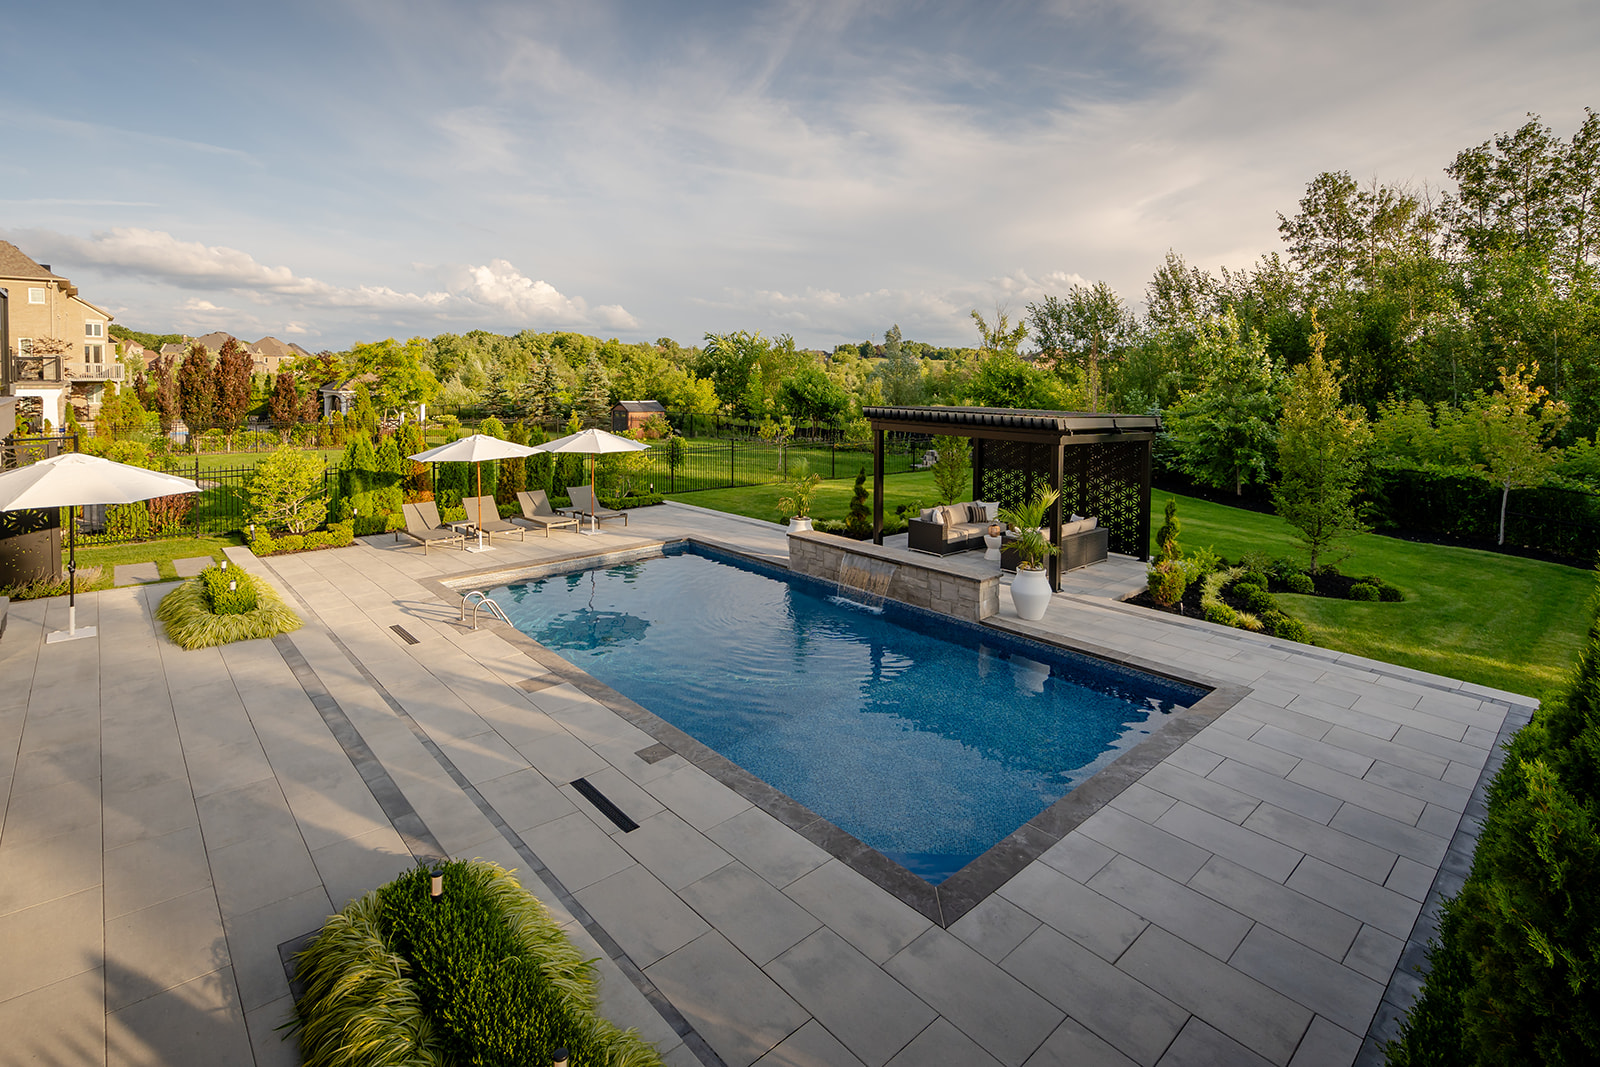 An inground pool with patio stones surrounding the pool, 3 open umbrellas and four lounge chairs.